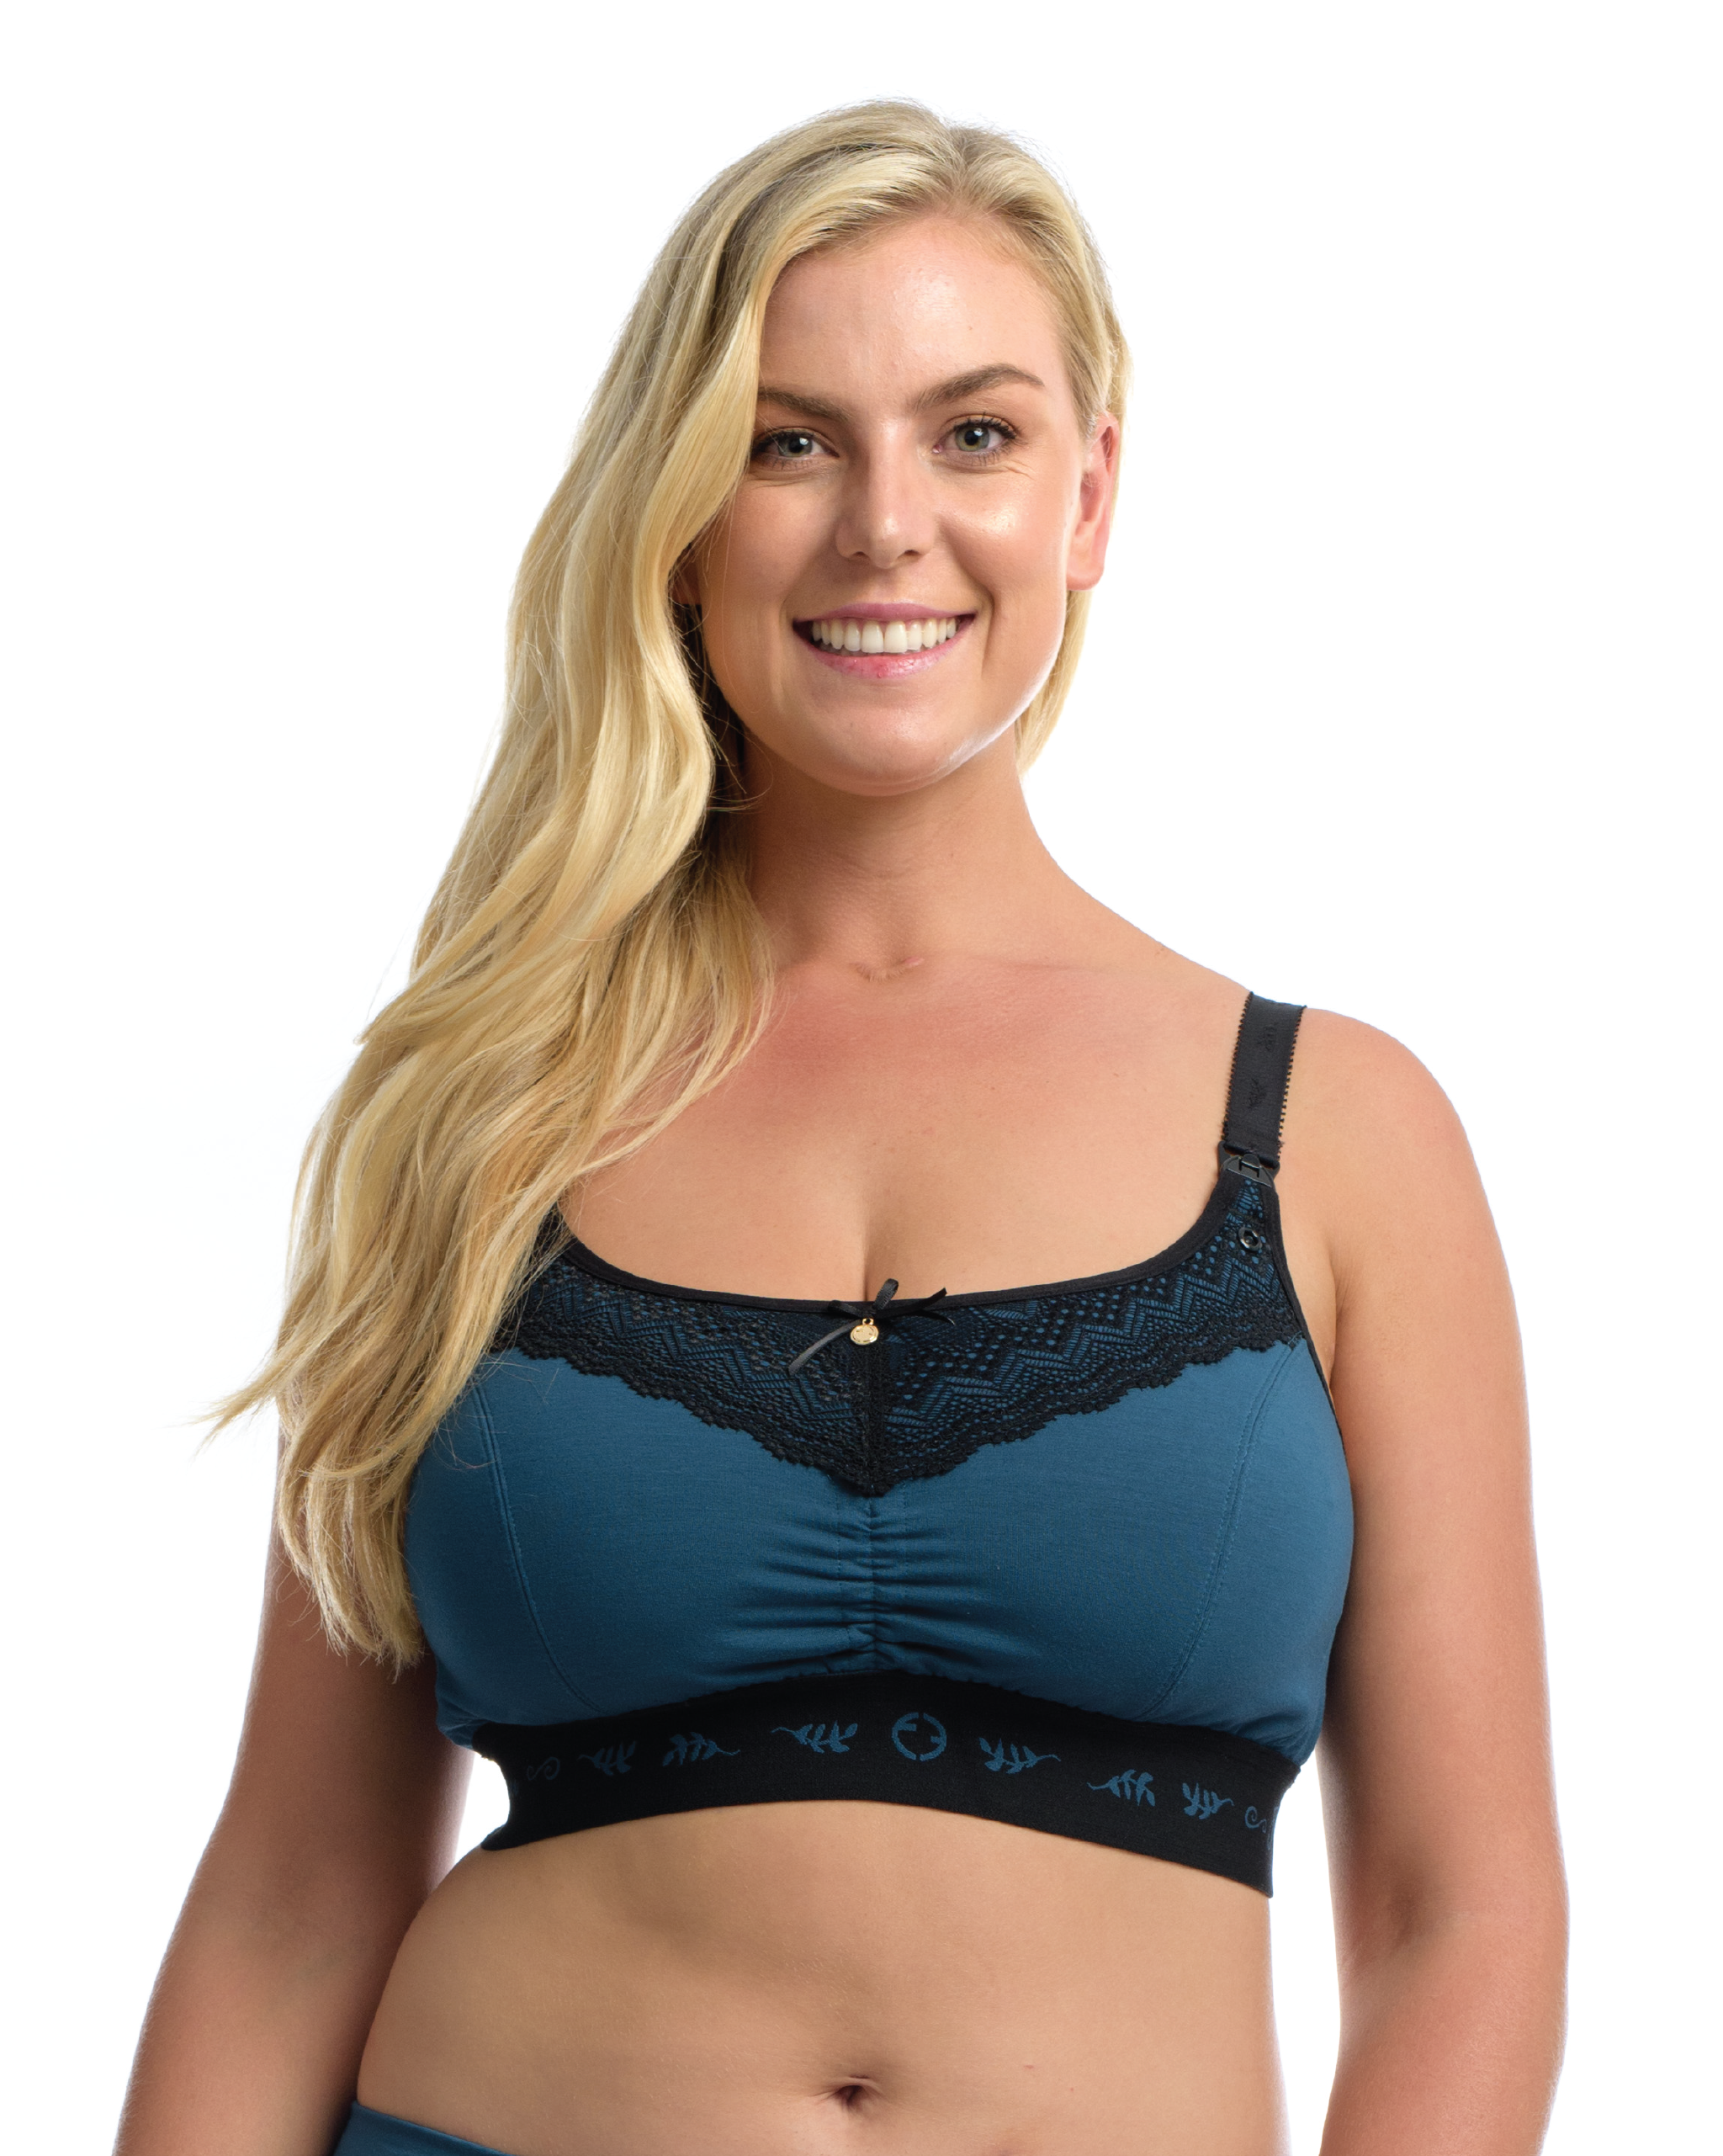 Curve Muse Plus Size Nursing Underwire Bra with drop-down cups (Pack of  3)-WHITE PRINT,LIGHT BLUE,CREAM-40DD